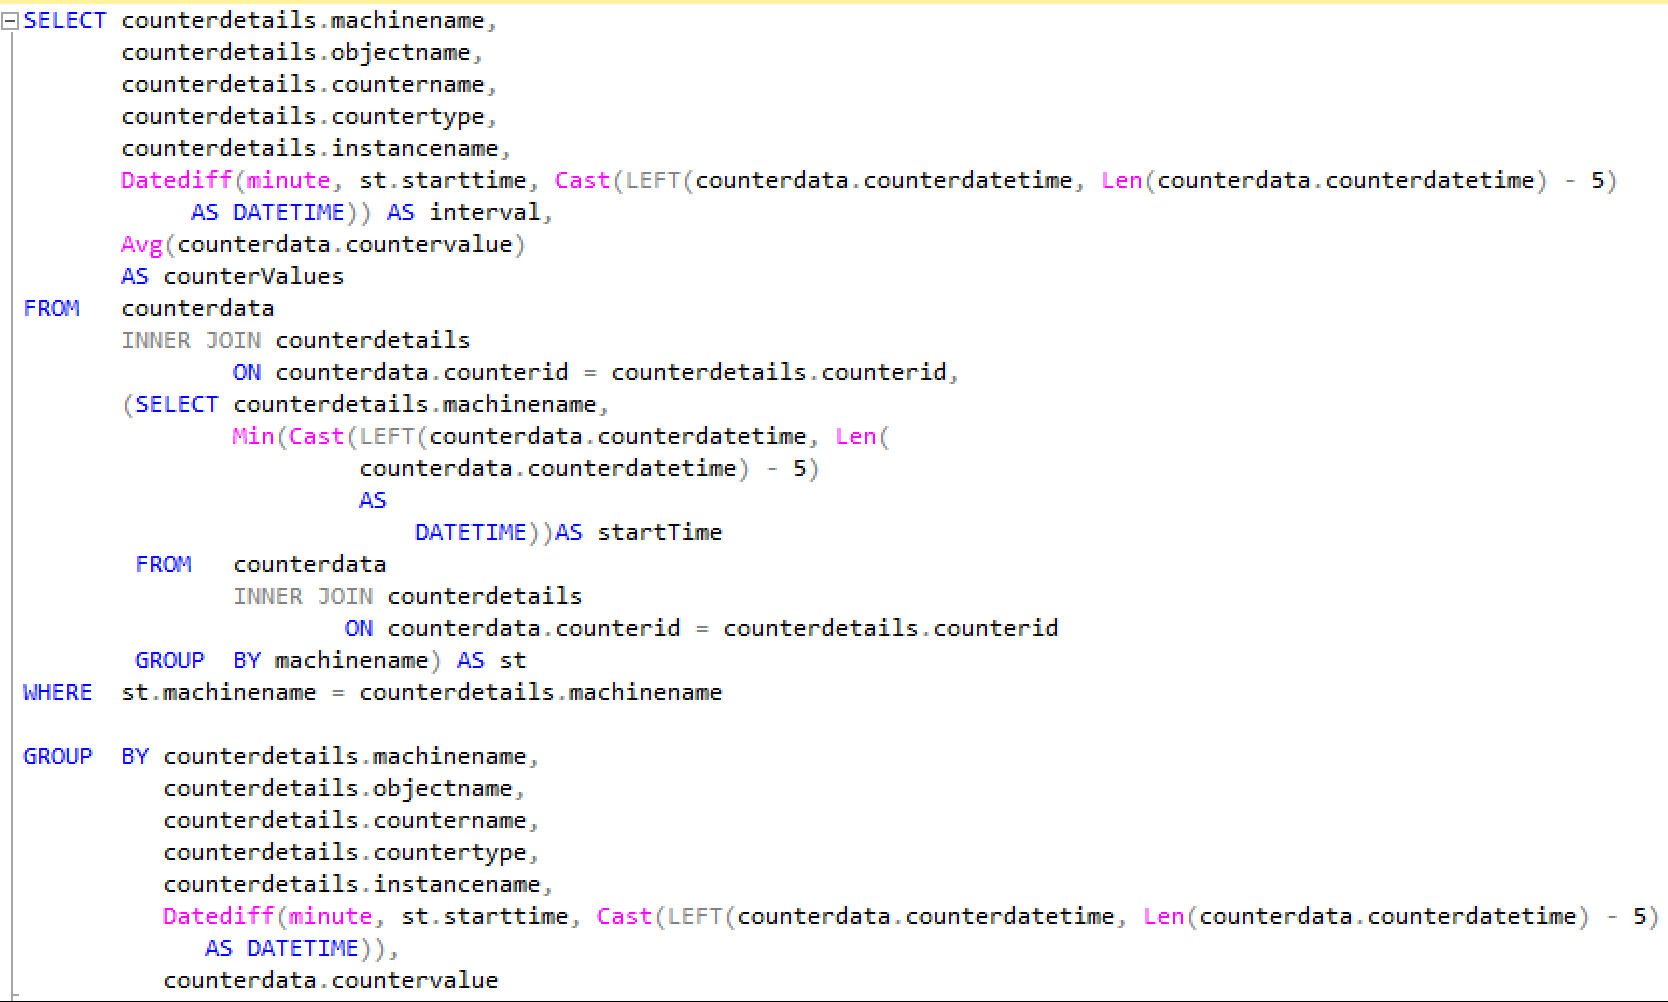 SELECT counterdetails.machinename,        counterdetails.objectname,        counterdetails.countername,        counterdetails.countertype,        counterdetails.instancename,        Datediff(minute, st.starttime, Cast(LEFT(counterdata.counterdatetime, Len(counterdata.counterdatetime) - 5) AS DATETIME)) AS interval,        Avg(counterdata.countervalue)        AS counterValues FROM   counterdata        INNER JOIN counterdetails                ON counterdata.counterid = counterdetails.counterid,        (SELECT counterdetails.machinename,                Min(Cast(LEFT(counterdata.counterdatetime, Len(                         counterdata.counterdatetime) - 5)                         AS                             DATETIME))AS startTime         FROM   counterdata                INNER JOIN counterdetails                        ON counterdata.counterid = counterdetails.counterid         GROUP  BY machinename) AS st WHERE  st.machinename = counterdetails.machinename GROUP  BY counterdetails.machinename,           counterdetails.objectname,           counterdetails.countername,           counterdetails.countertype,           counterdetails.instancename,           Datediff(minute, st.starttime, Cast(LEFT(counterdata.counterdatetime, Len(counterdata.counterdatetime) - 5)  AS DATETIME)),           counterdata.countervalue  